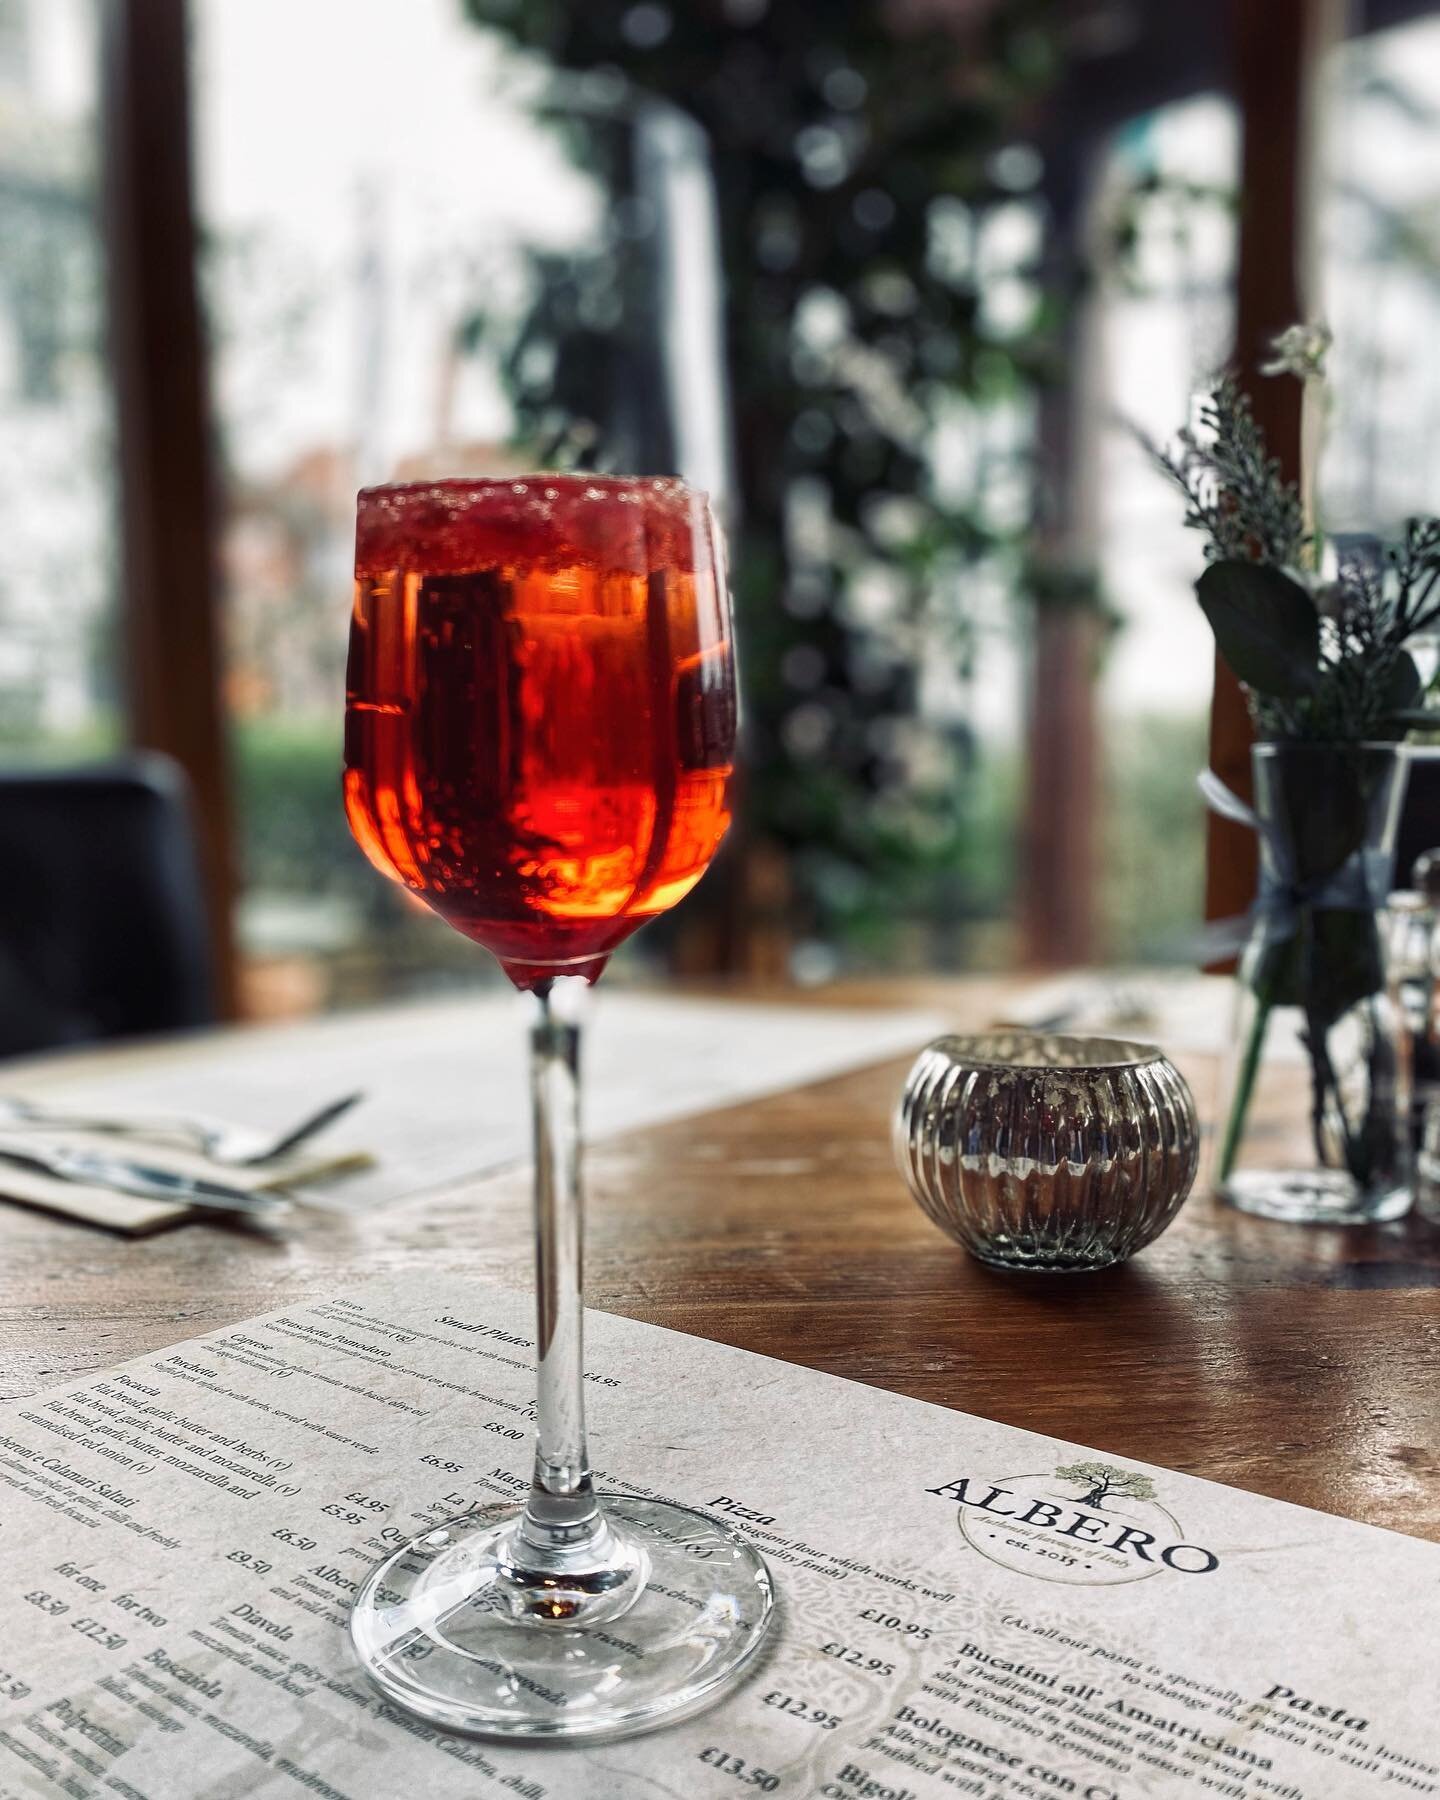 We are entering this festive week with refreshing cocktail of Campari enhanced by the sparkling aromatic note of Prosecco garnished with pomegranate seeds 👌🏻🥂

&hellip; not only does this look beautiful it tastes so delicious and makes a great ape